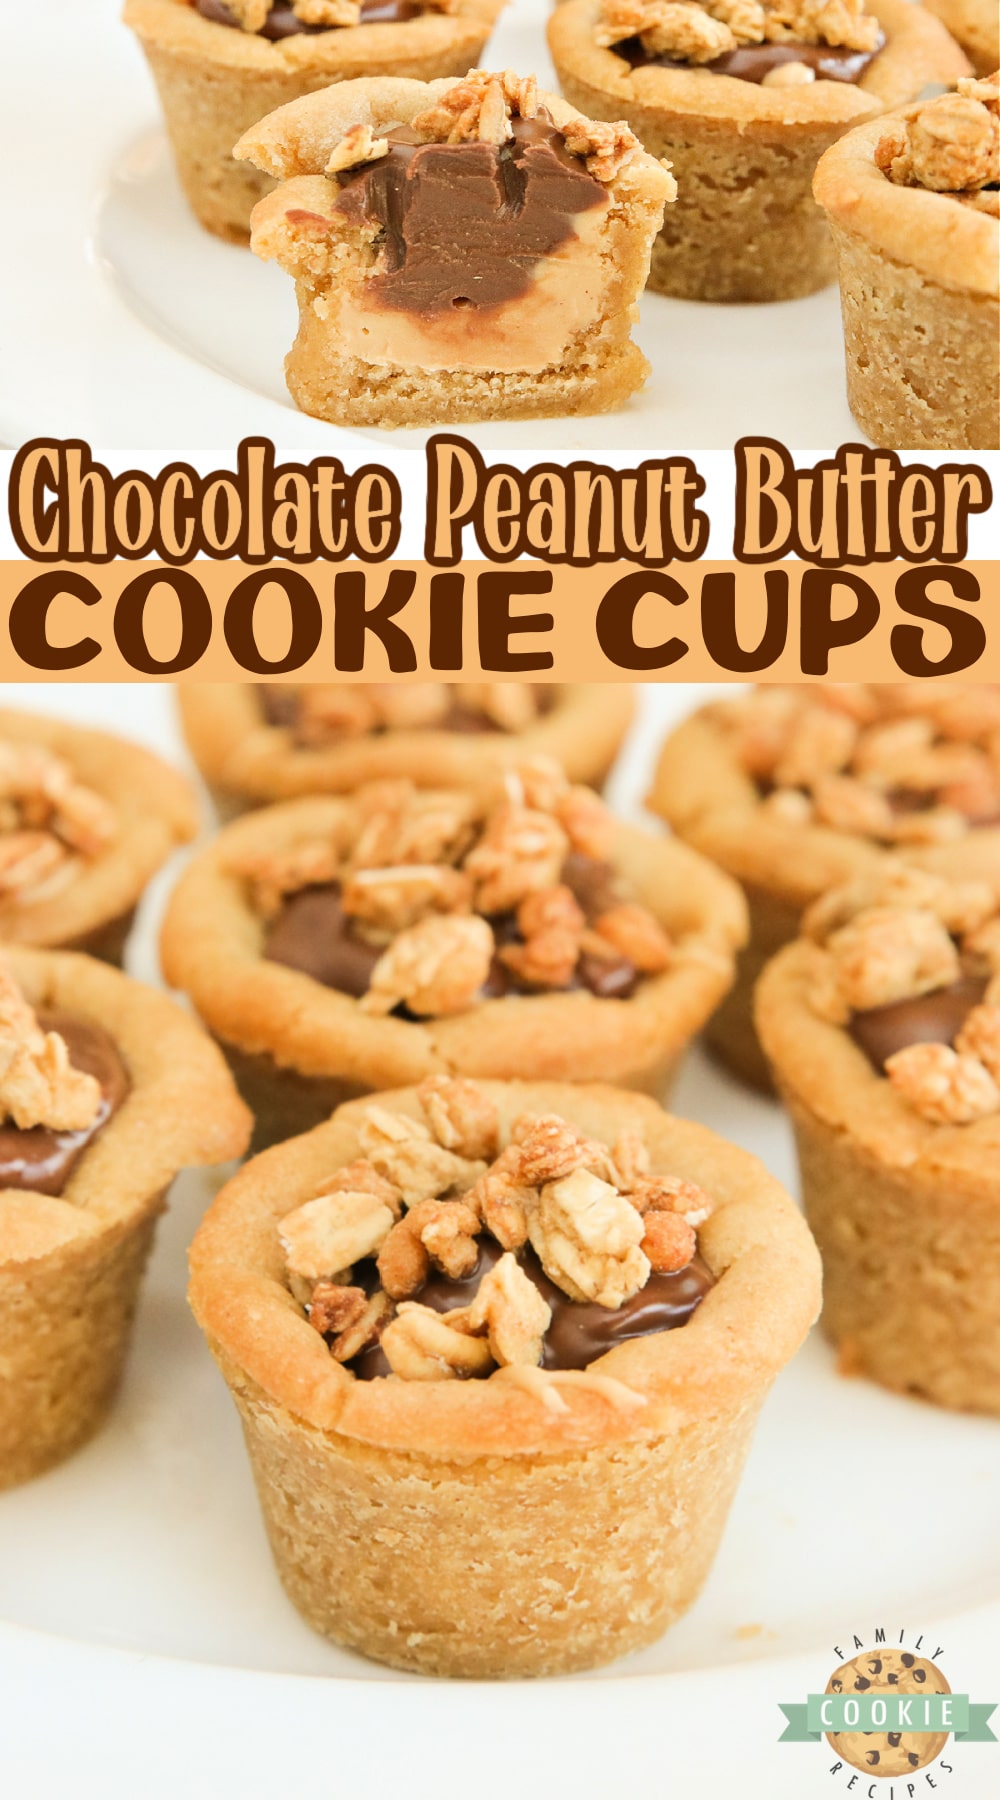 Chocolate Peanut Butter Cookie Cups are easily made with only 5 ingredients! Peanut butter cookie cups are filled with creamy peanut butter and chocolate layers that are topped with granola for a little bit of a crunch! via @buttergirls